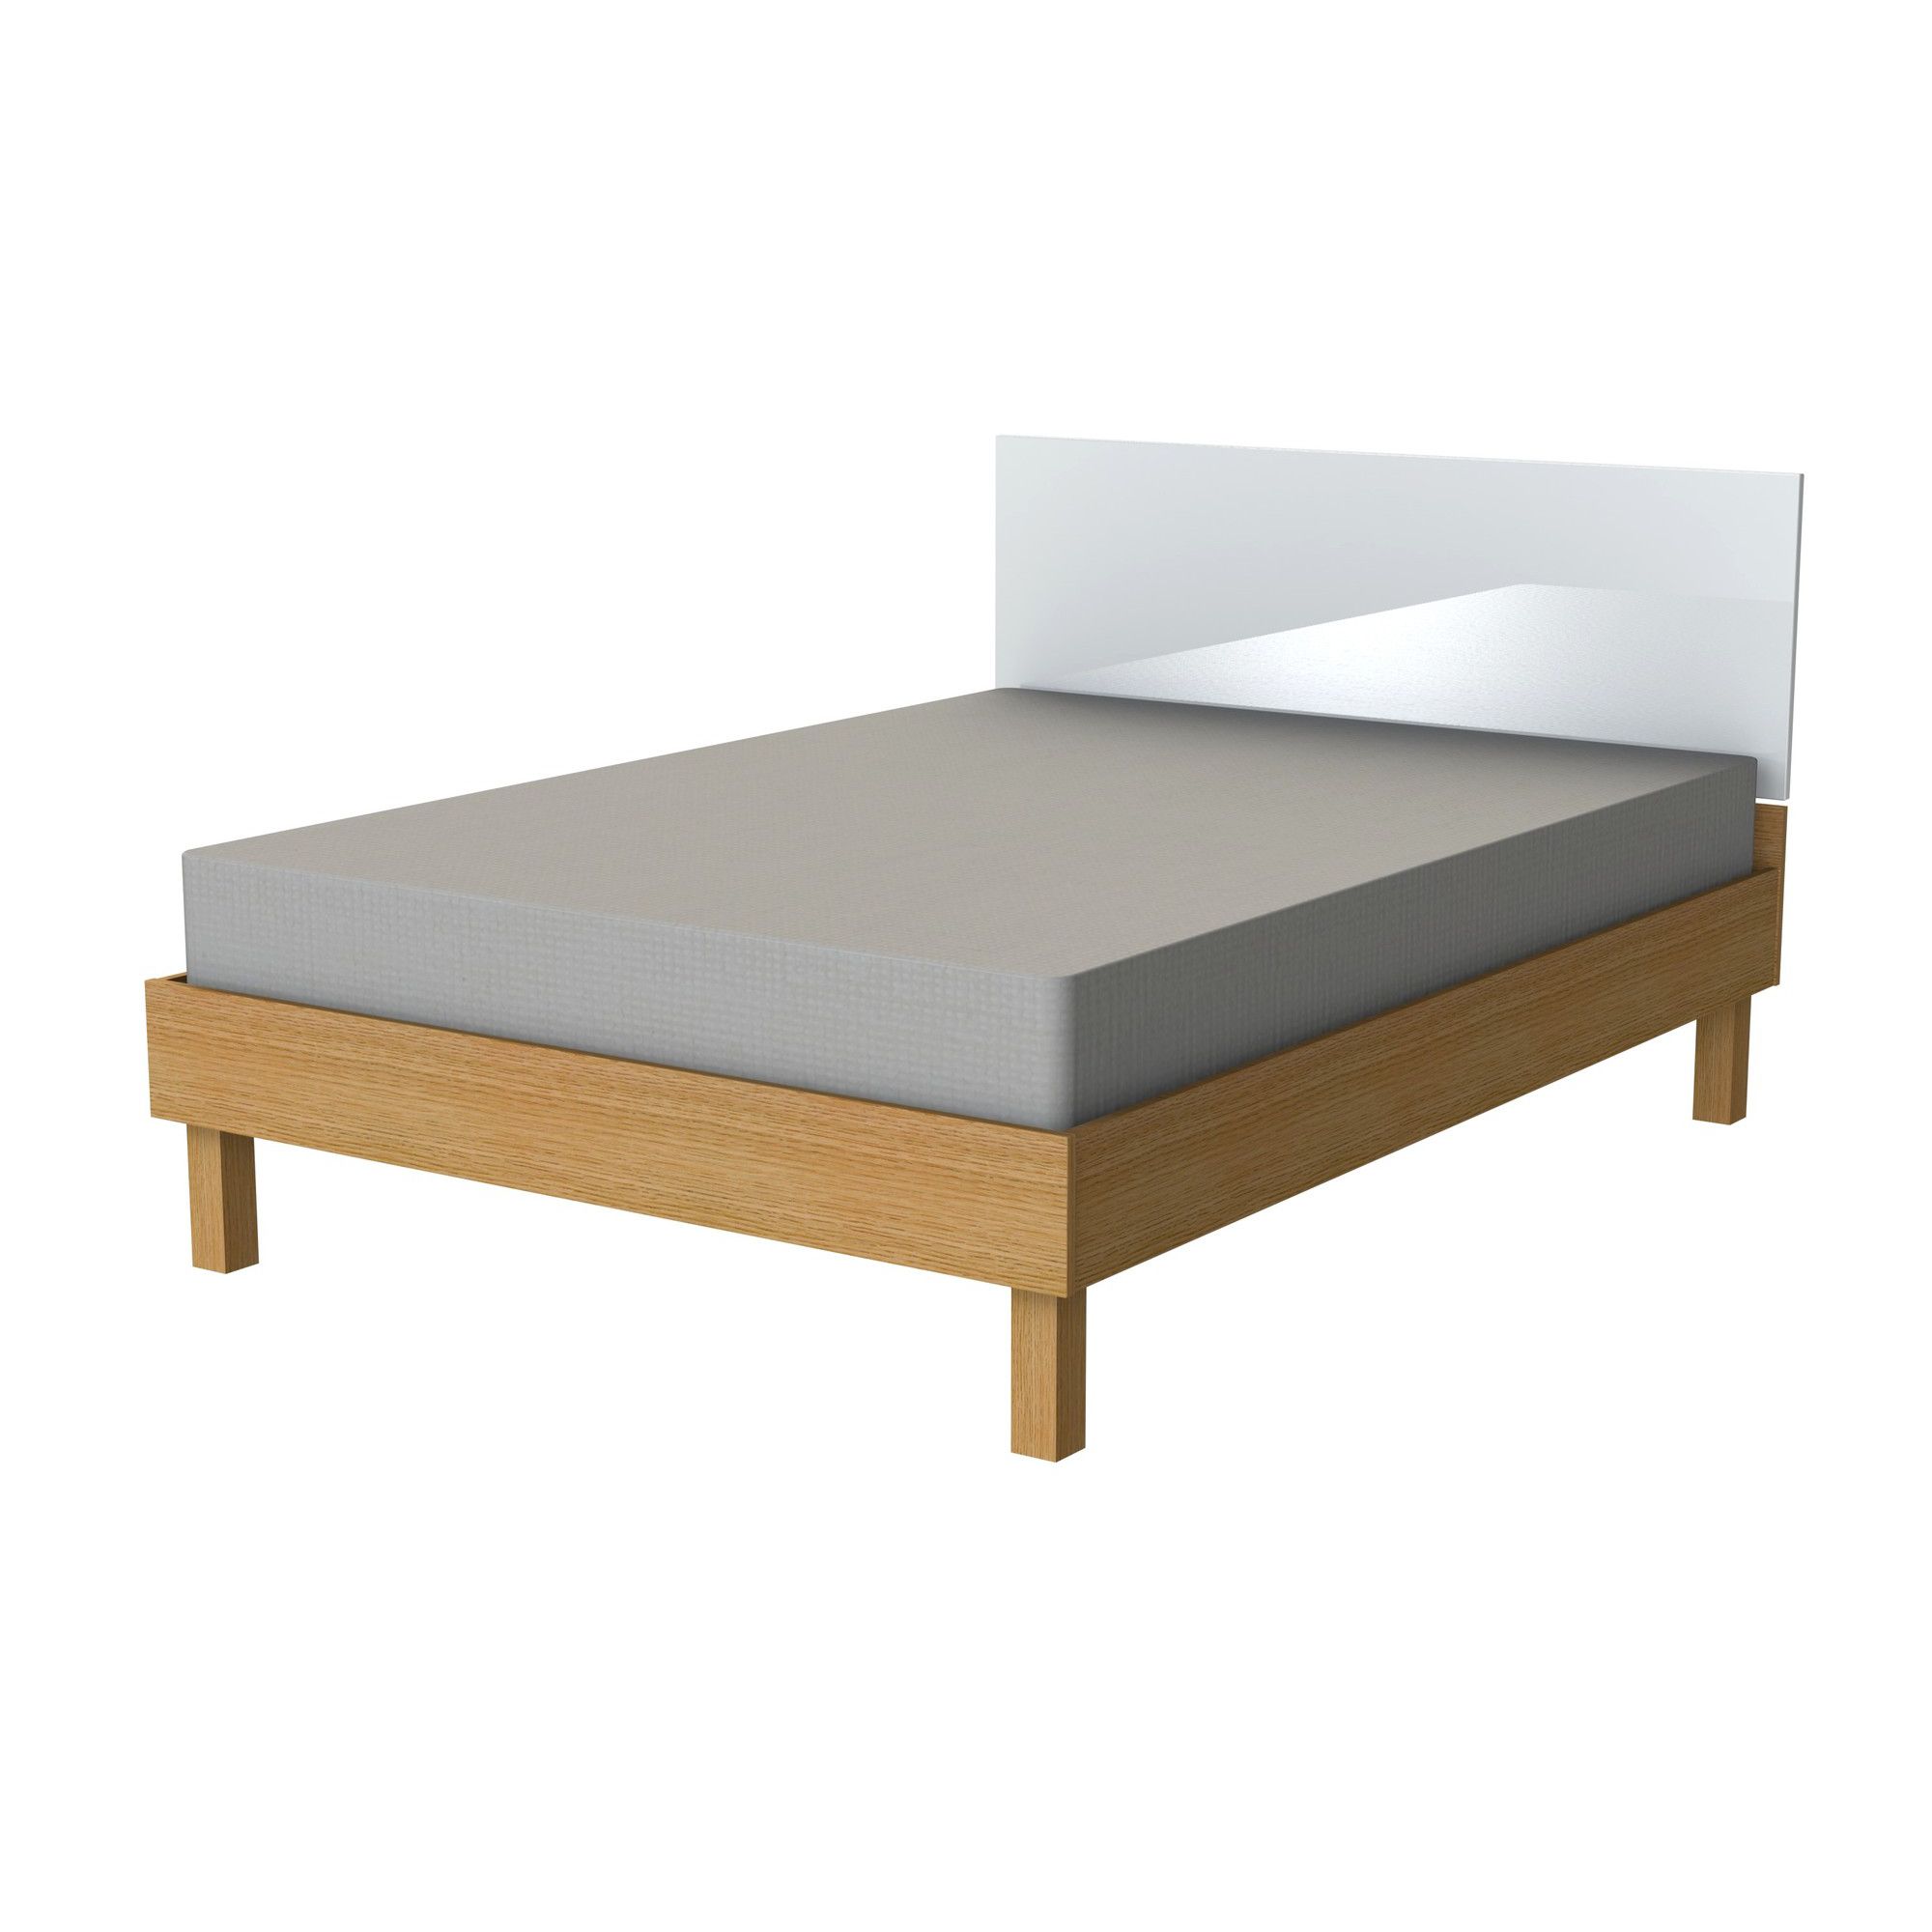 Ashcraft Modular Storage Double Bed - Oak With White Gloss at Tesco Direct